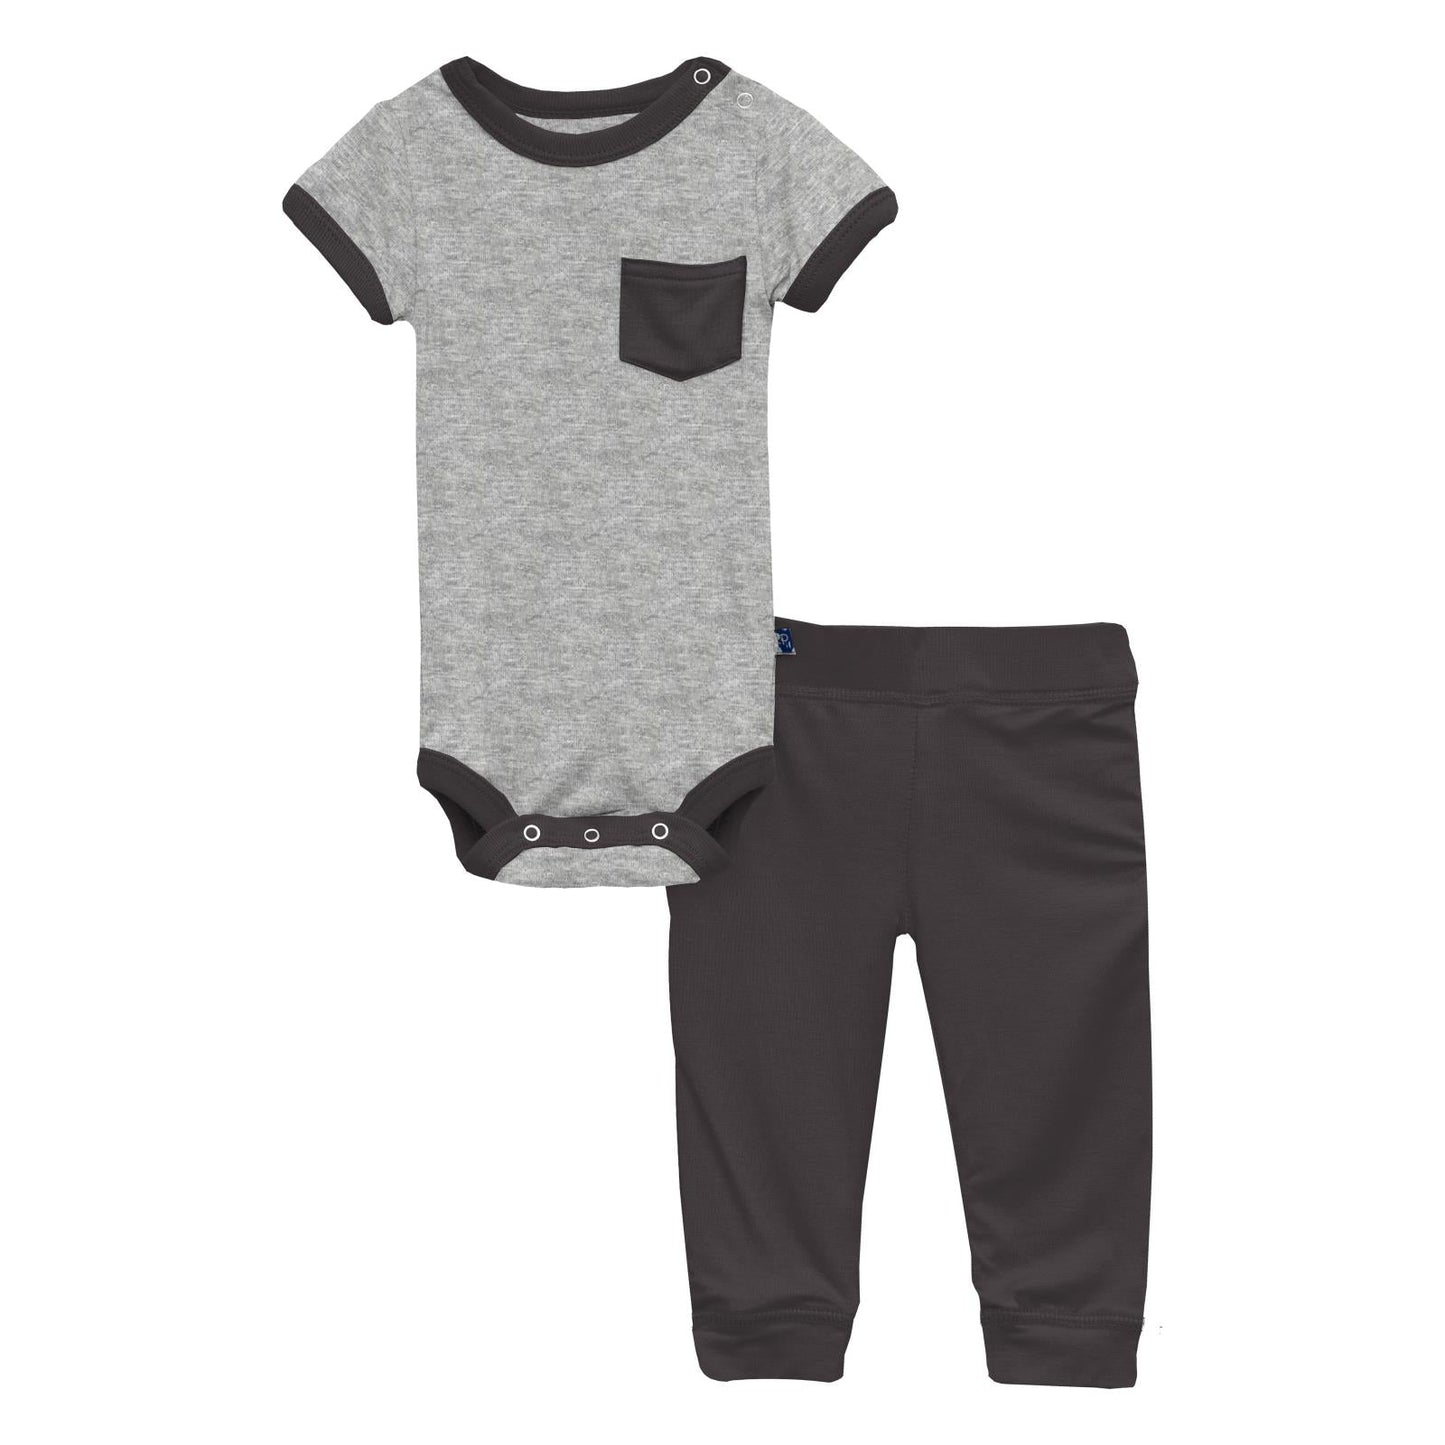 Kickee Pants Short Sleeve Pocket One Piece & Pants Outfit Set in Heathered Mist with Twilight